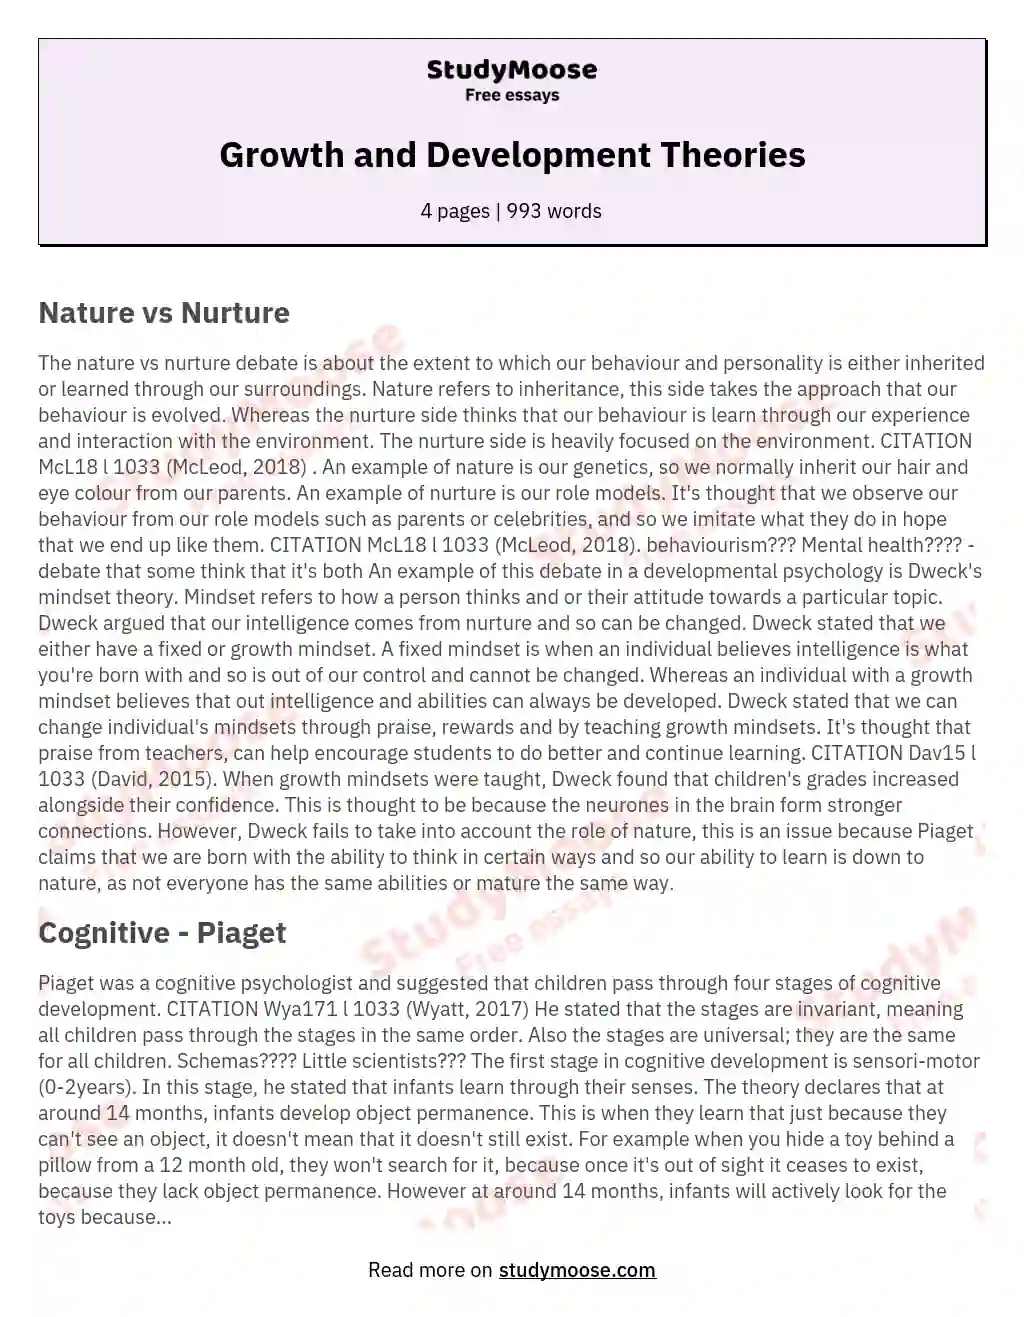 Growth and Development Theories essay